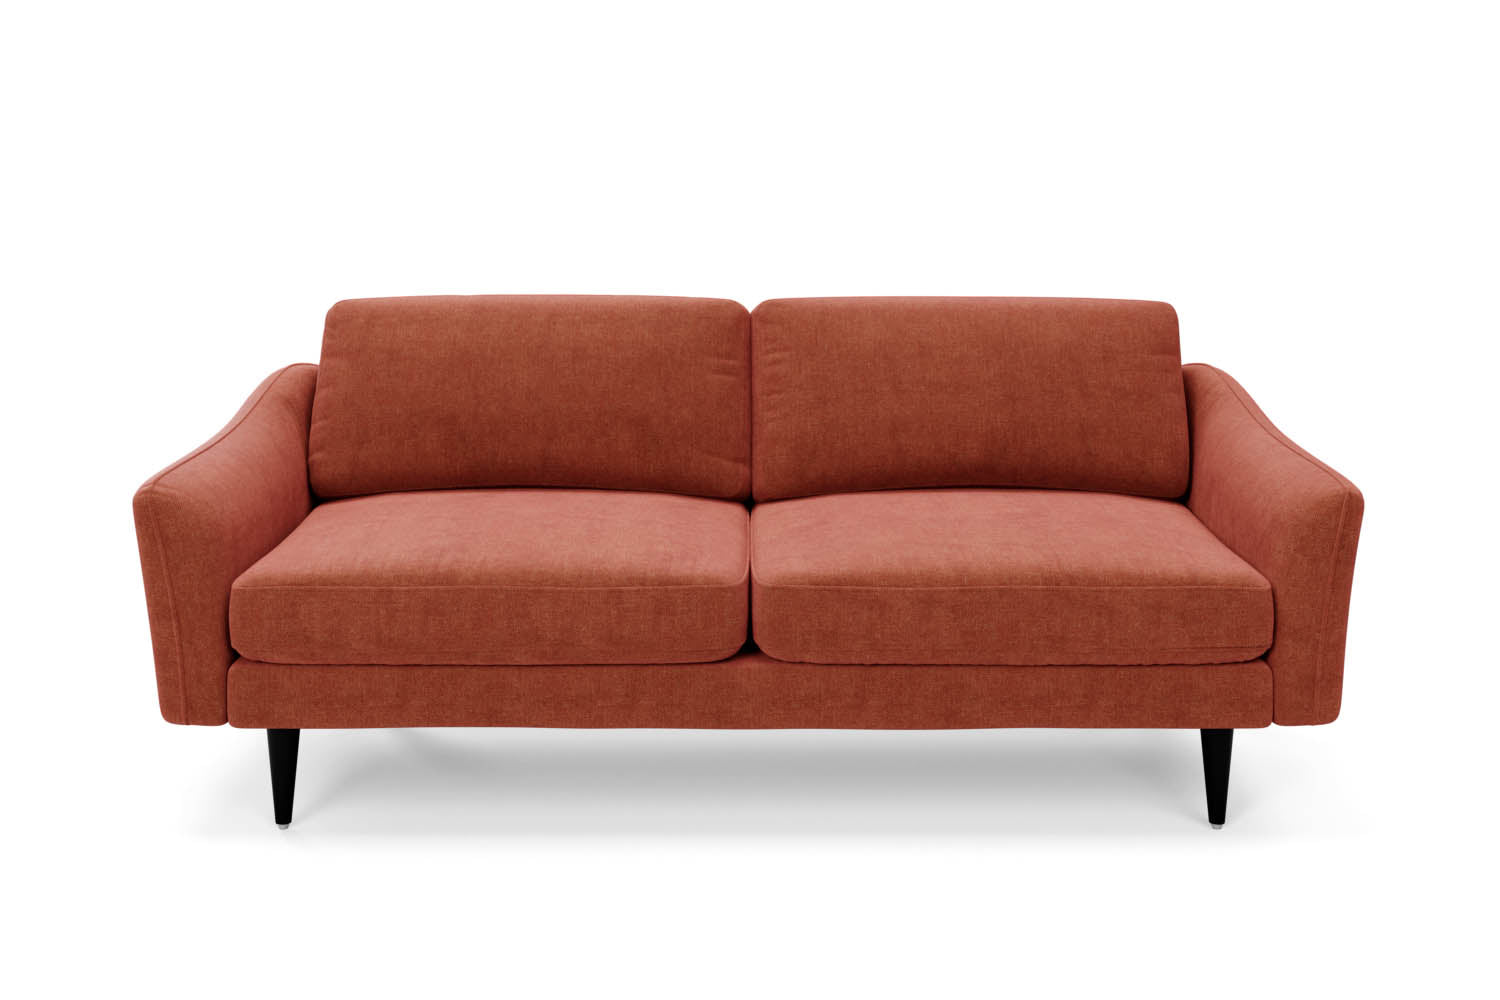 The Rebel 3 Seater Sofa in Spice with black legs front variant_40886277439536